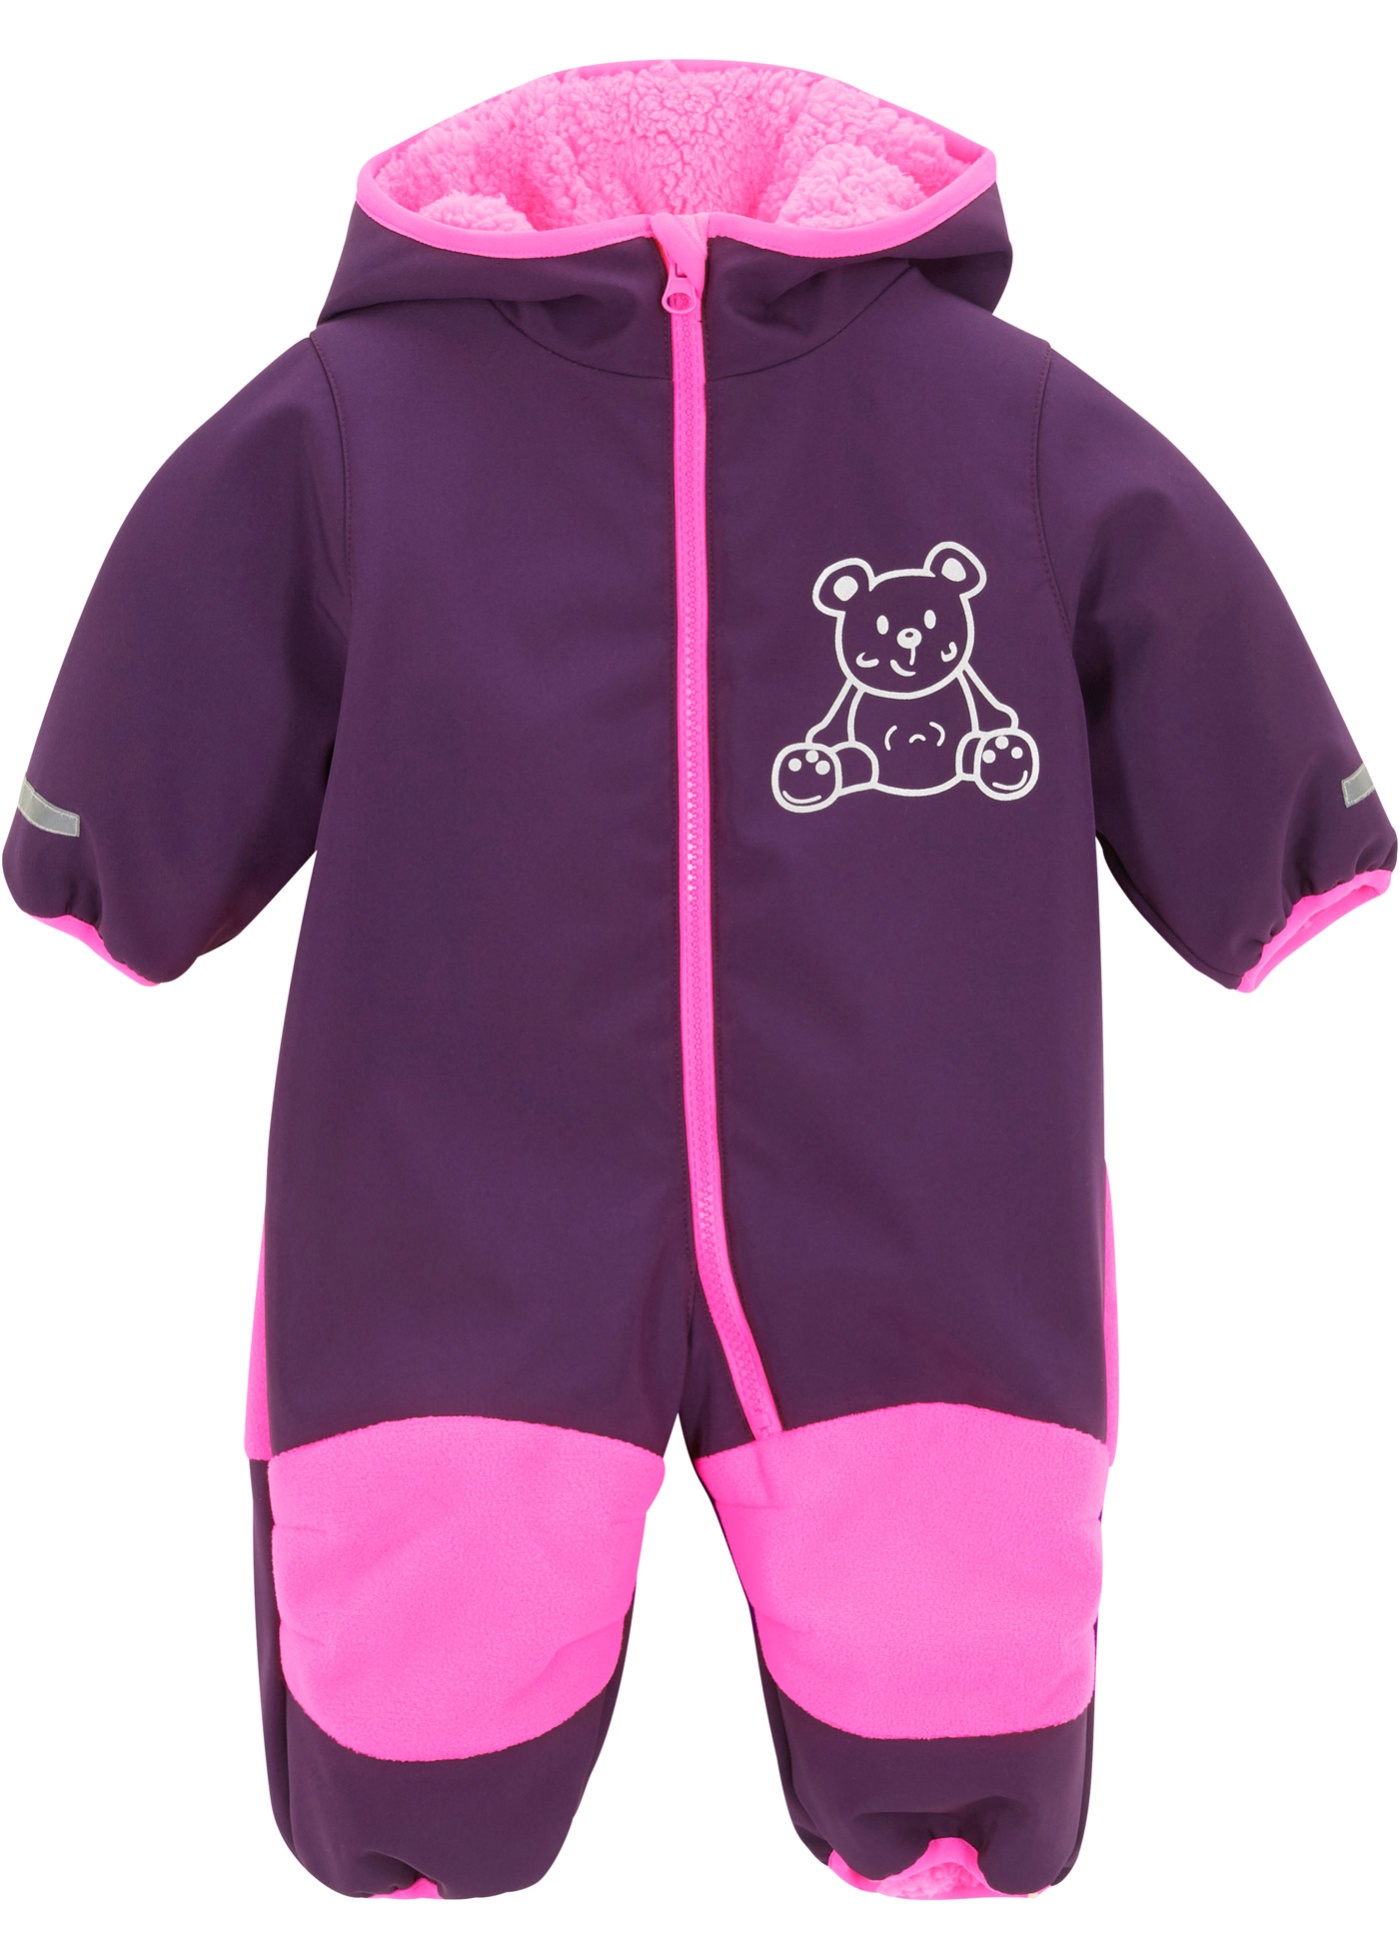 Baby Softshell Overall